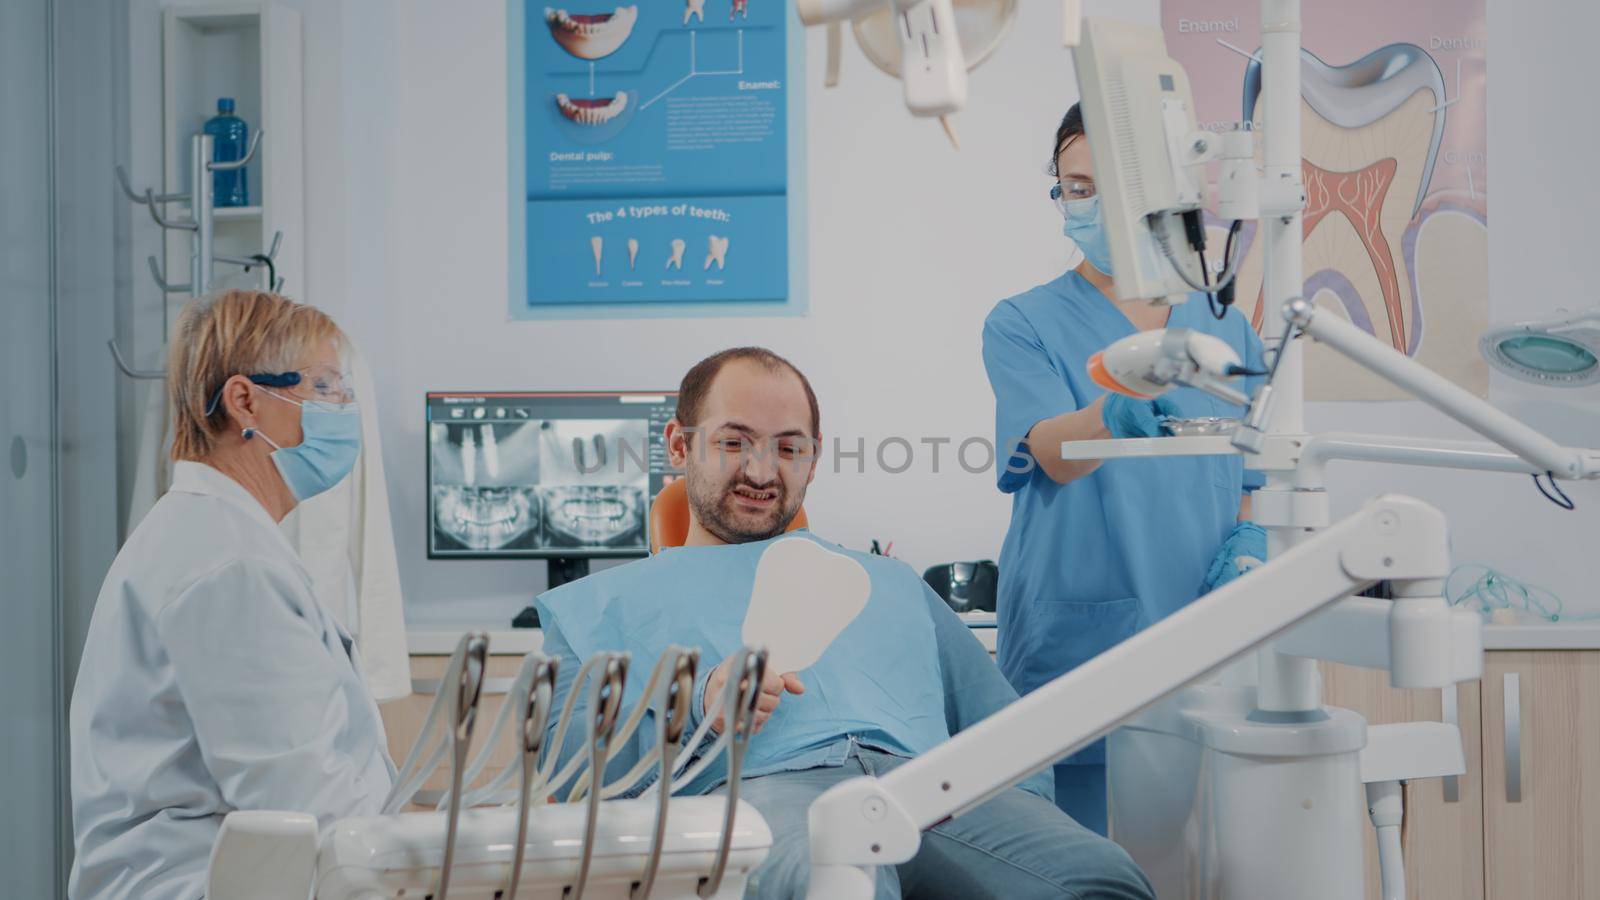 Patient holding mirror to see teeth alignment after dental procedure, looking at dentition results in stomatology cabinet. Man checking denture after successful implant and operation.